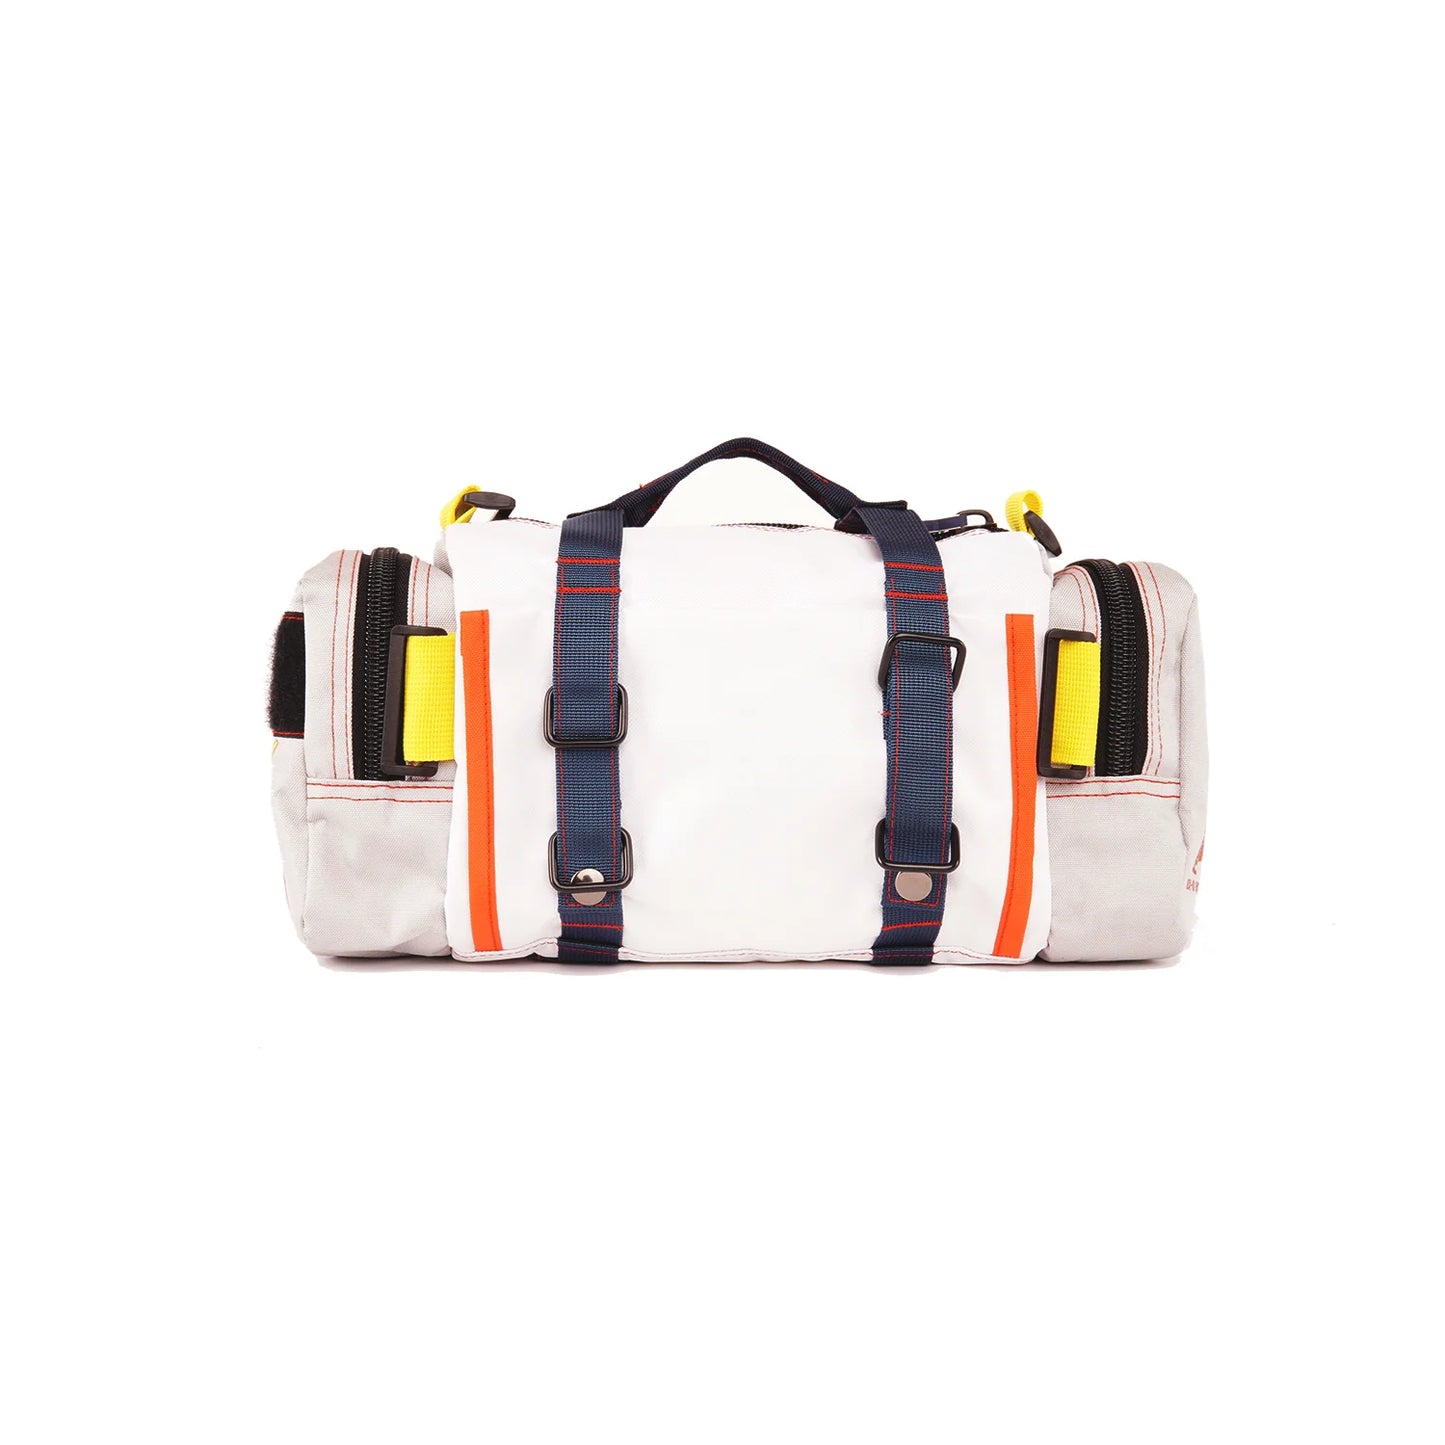 SHWA - Unicorn Mini Duffle with Strap (Pre-Order) Patches Included